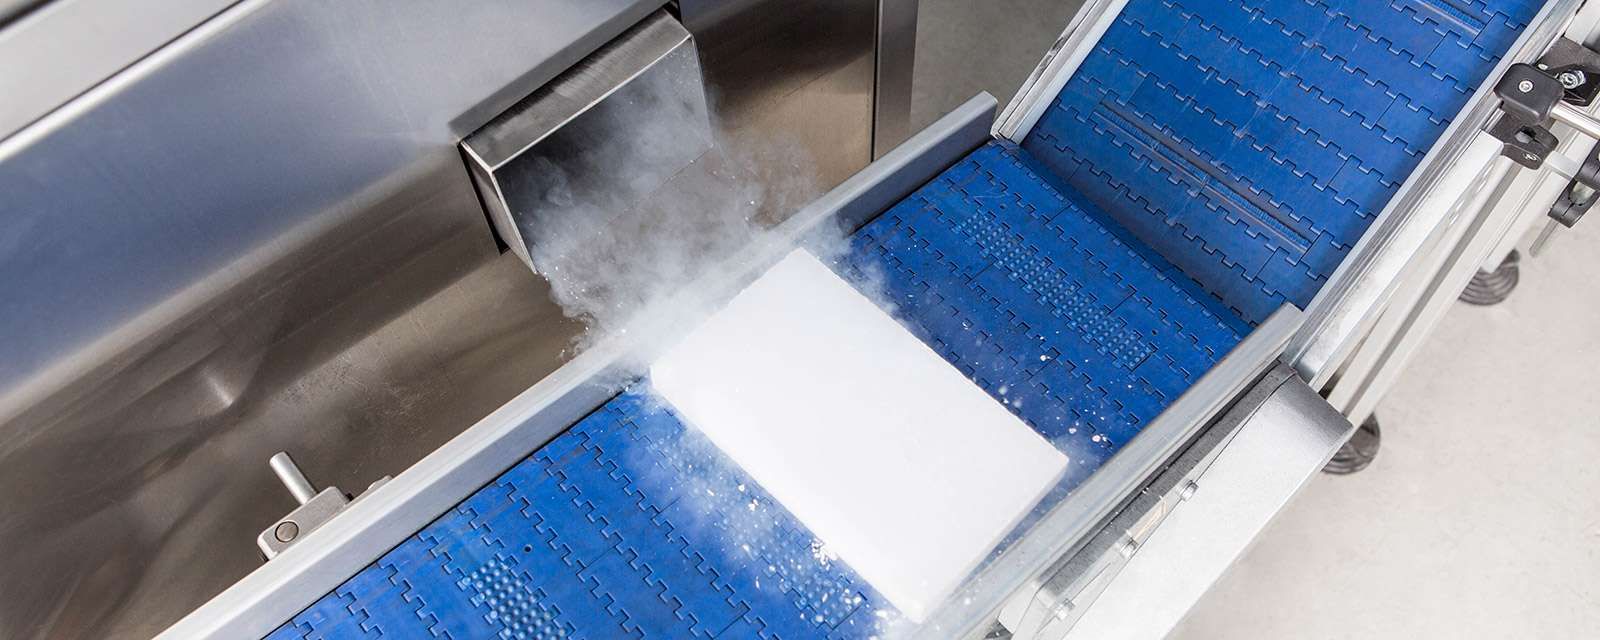 Dry Ice Production Equipment Market to Witness an Outstanding Growth during 2021-2031